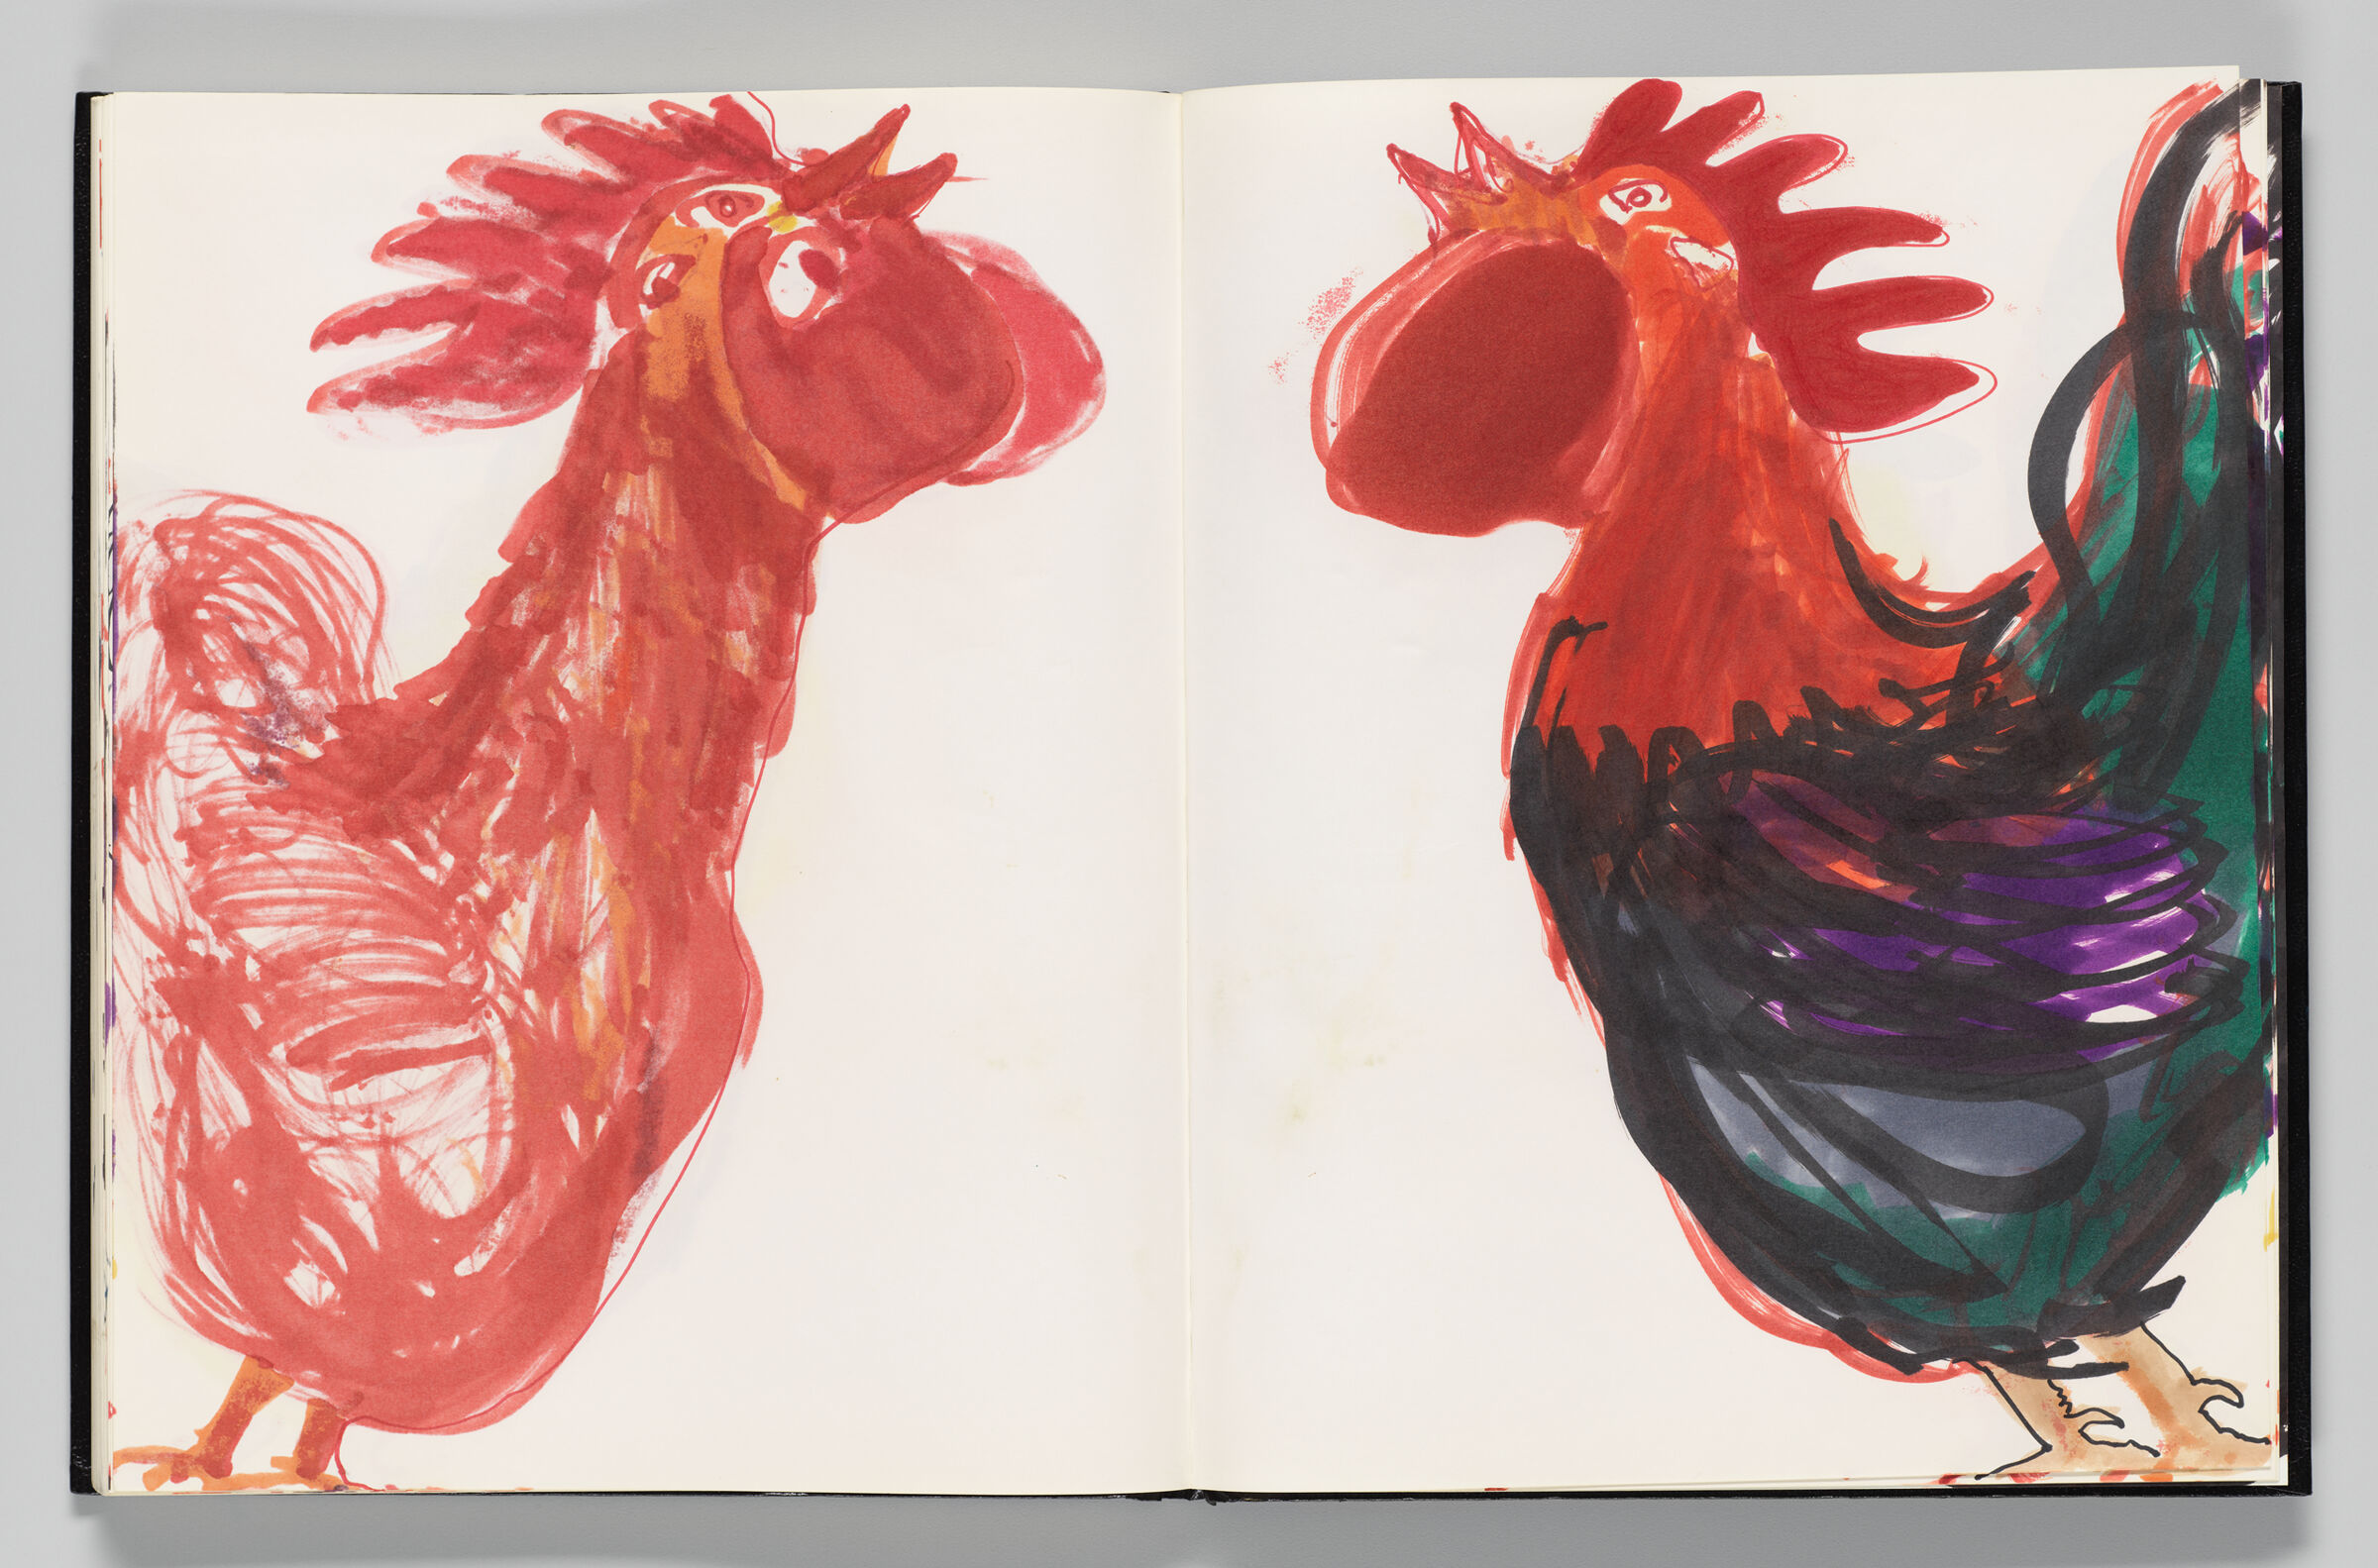 Untitled (Bleed-Through Of Previous Page And Color Transfer, Left Page); Untitled (Rooster, Right Page)